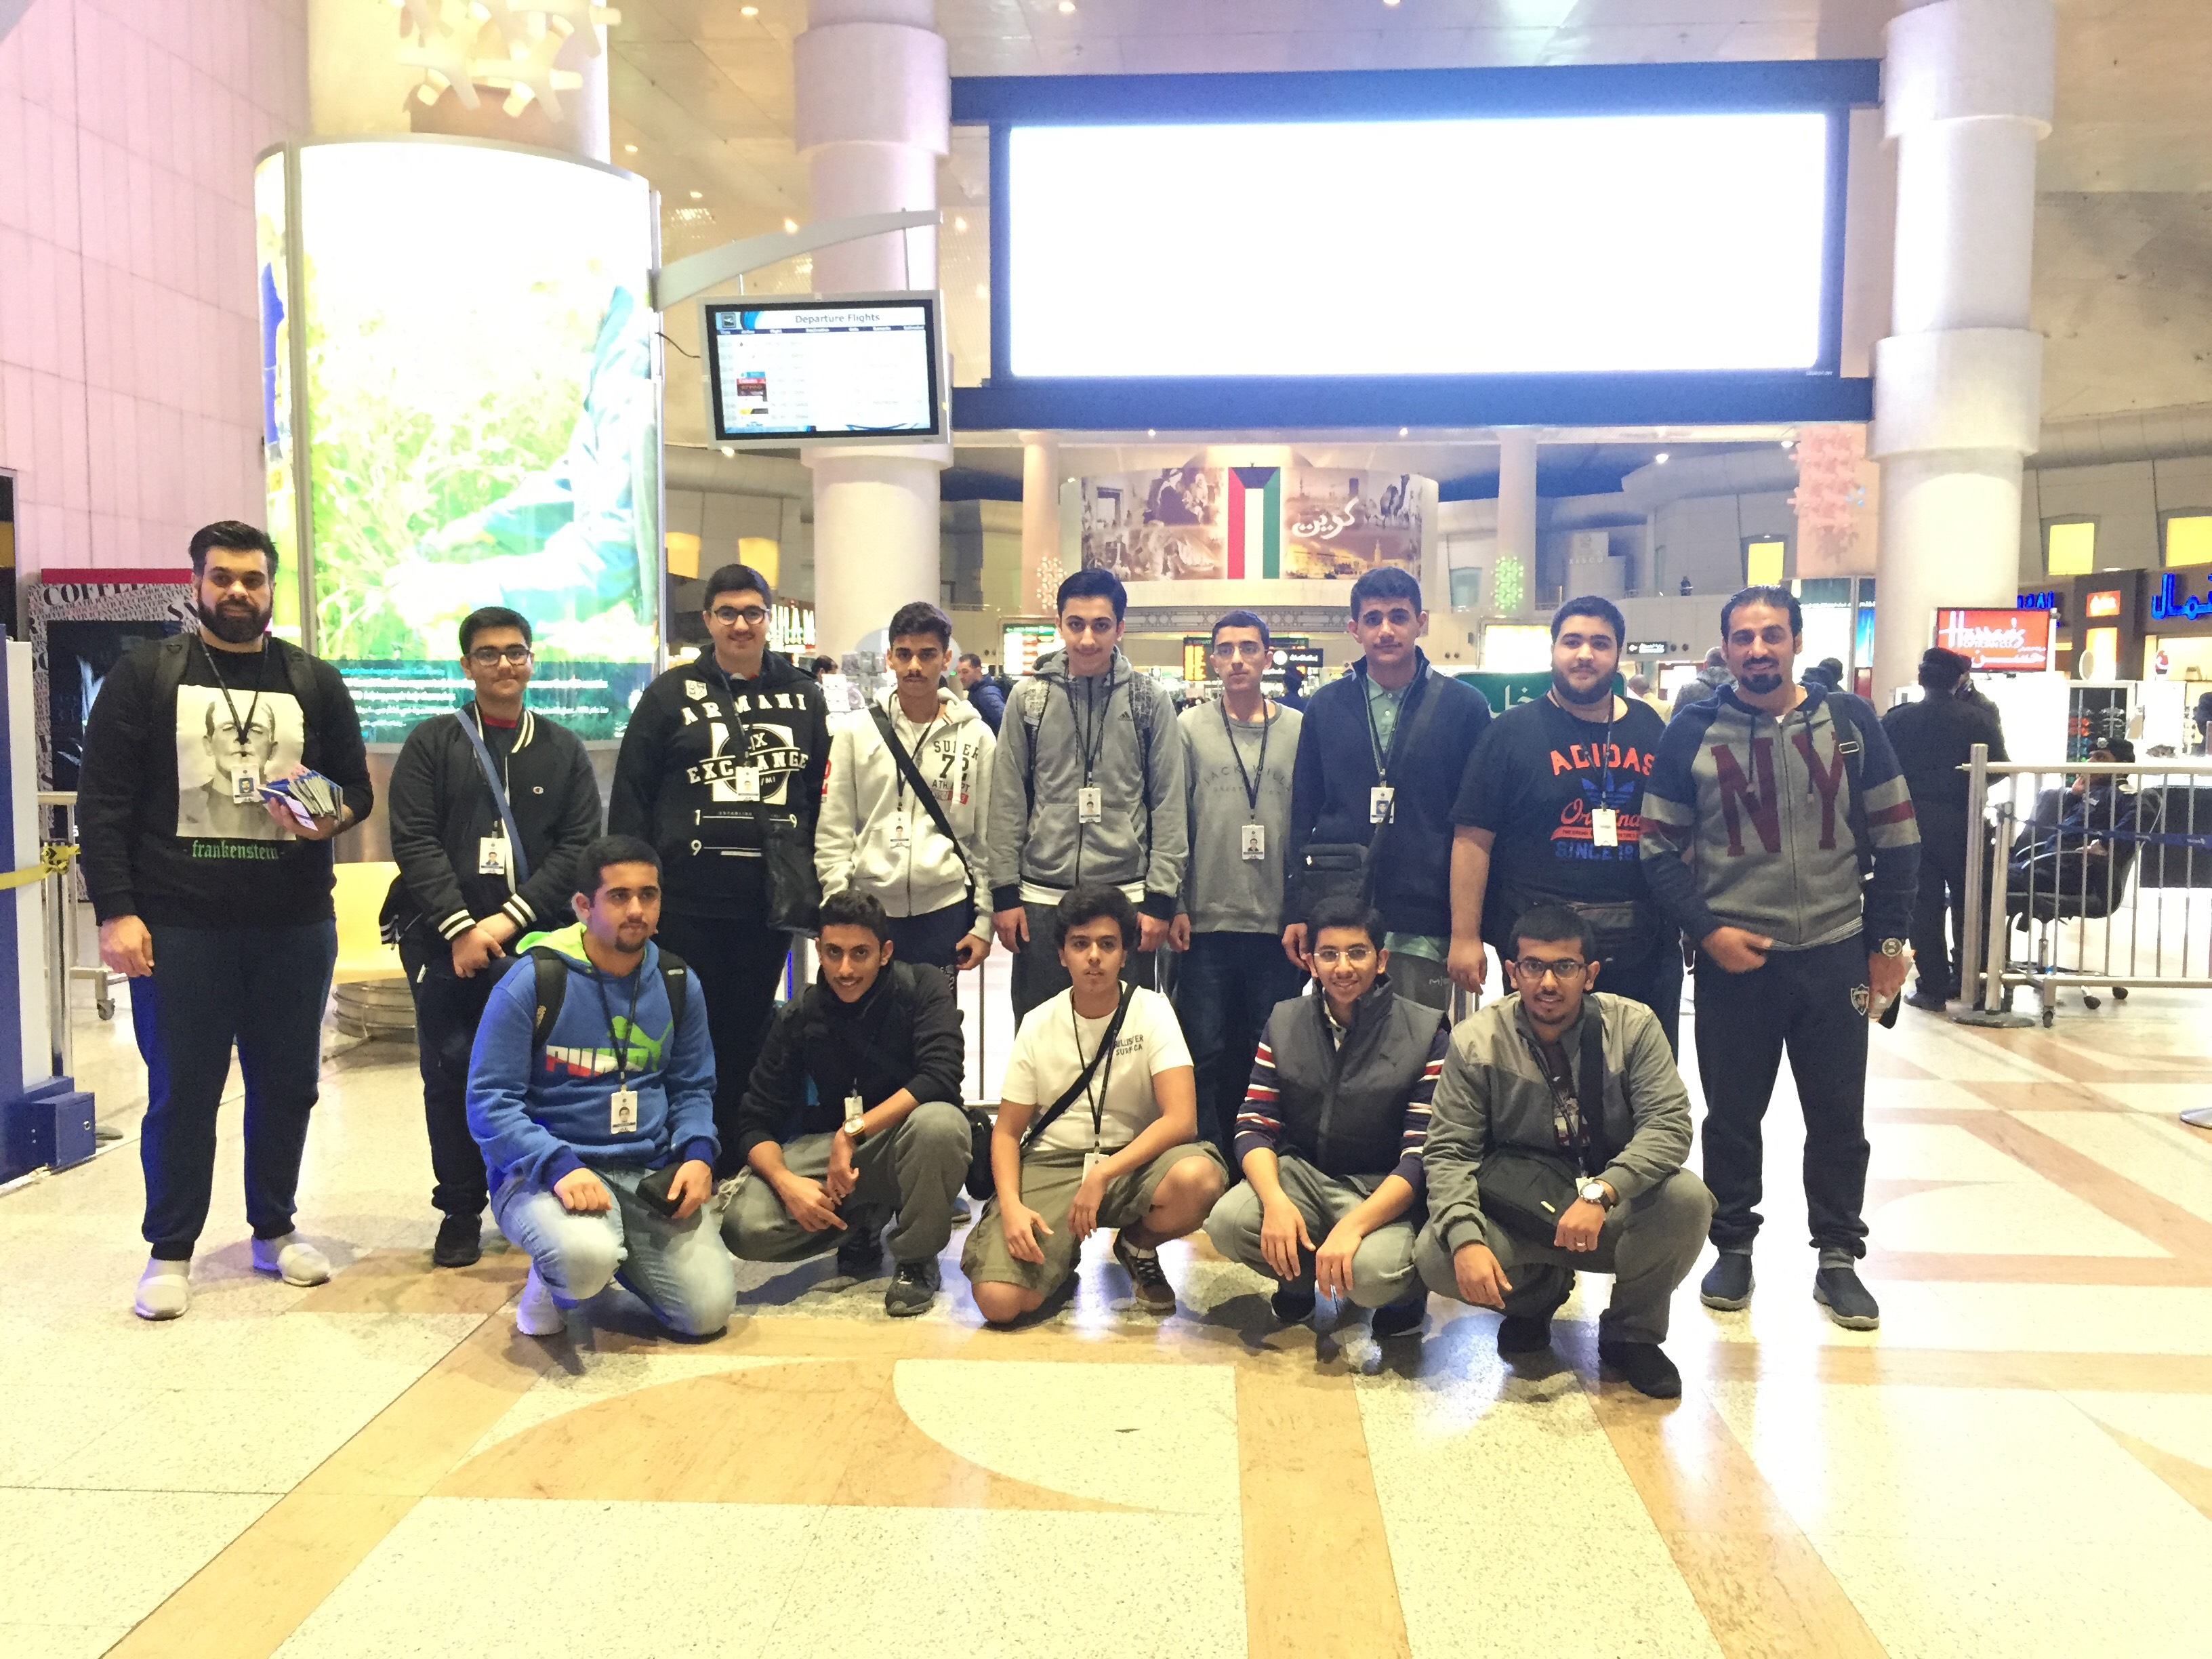 KFAED organizes trip to Cuba for high-achieving students